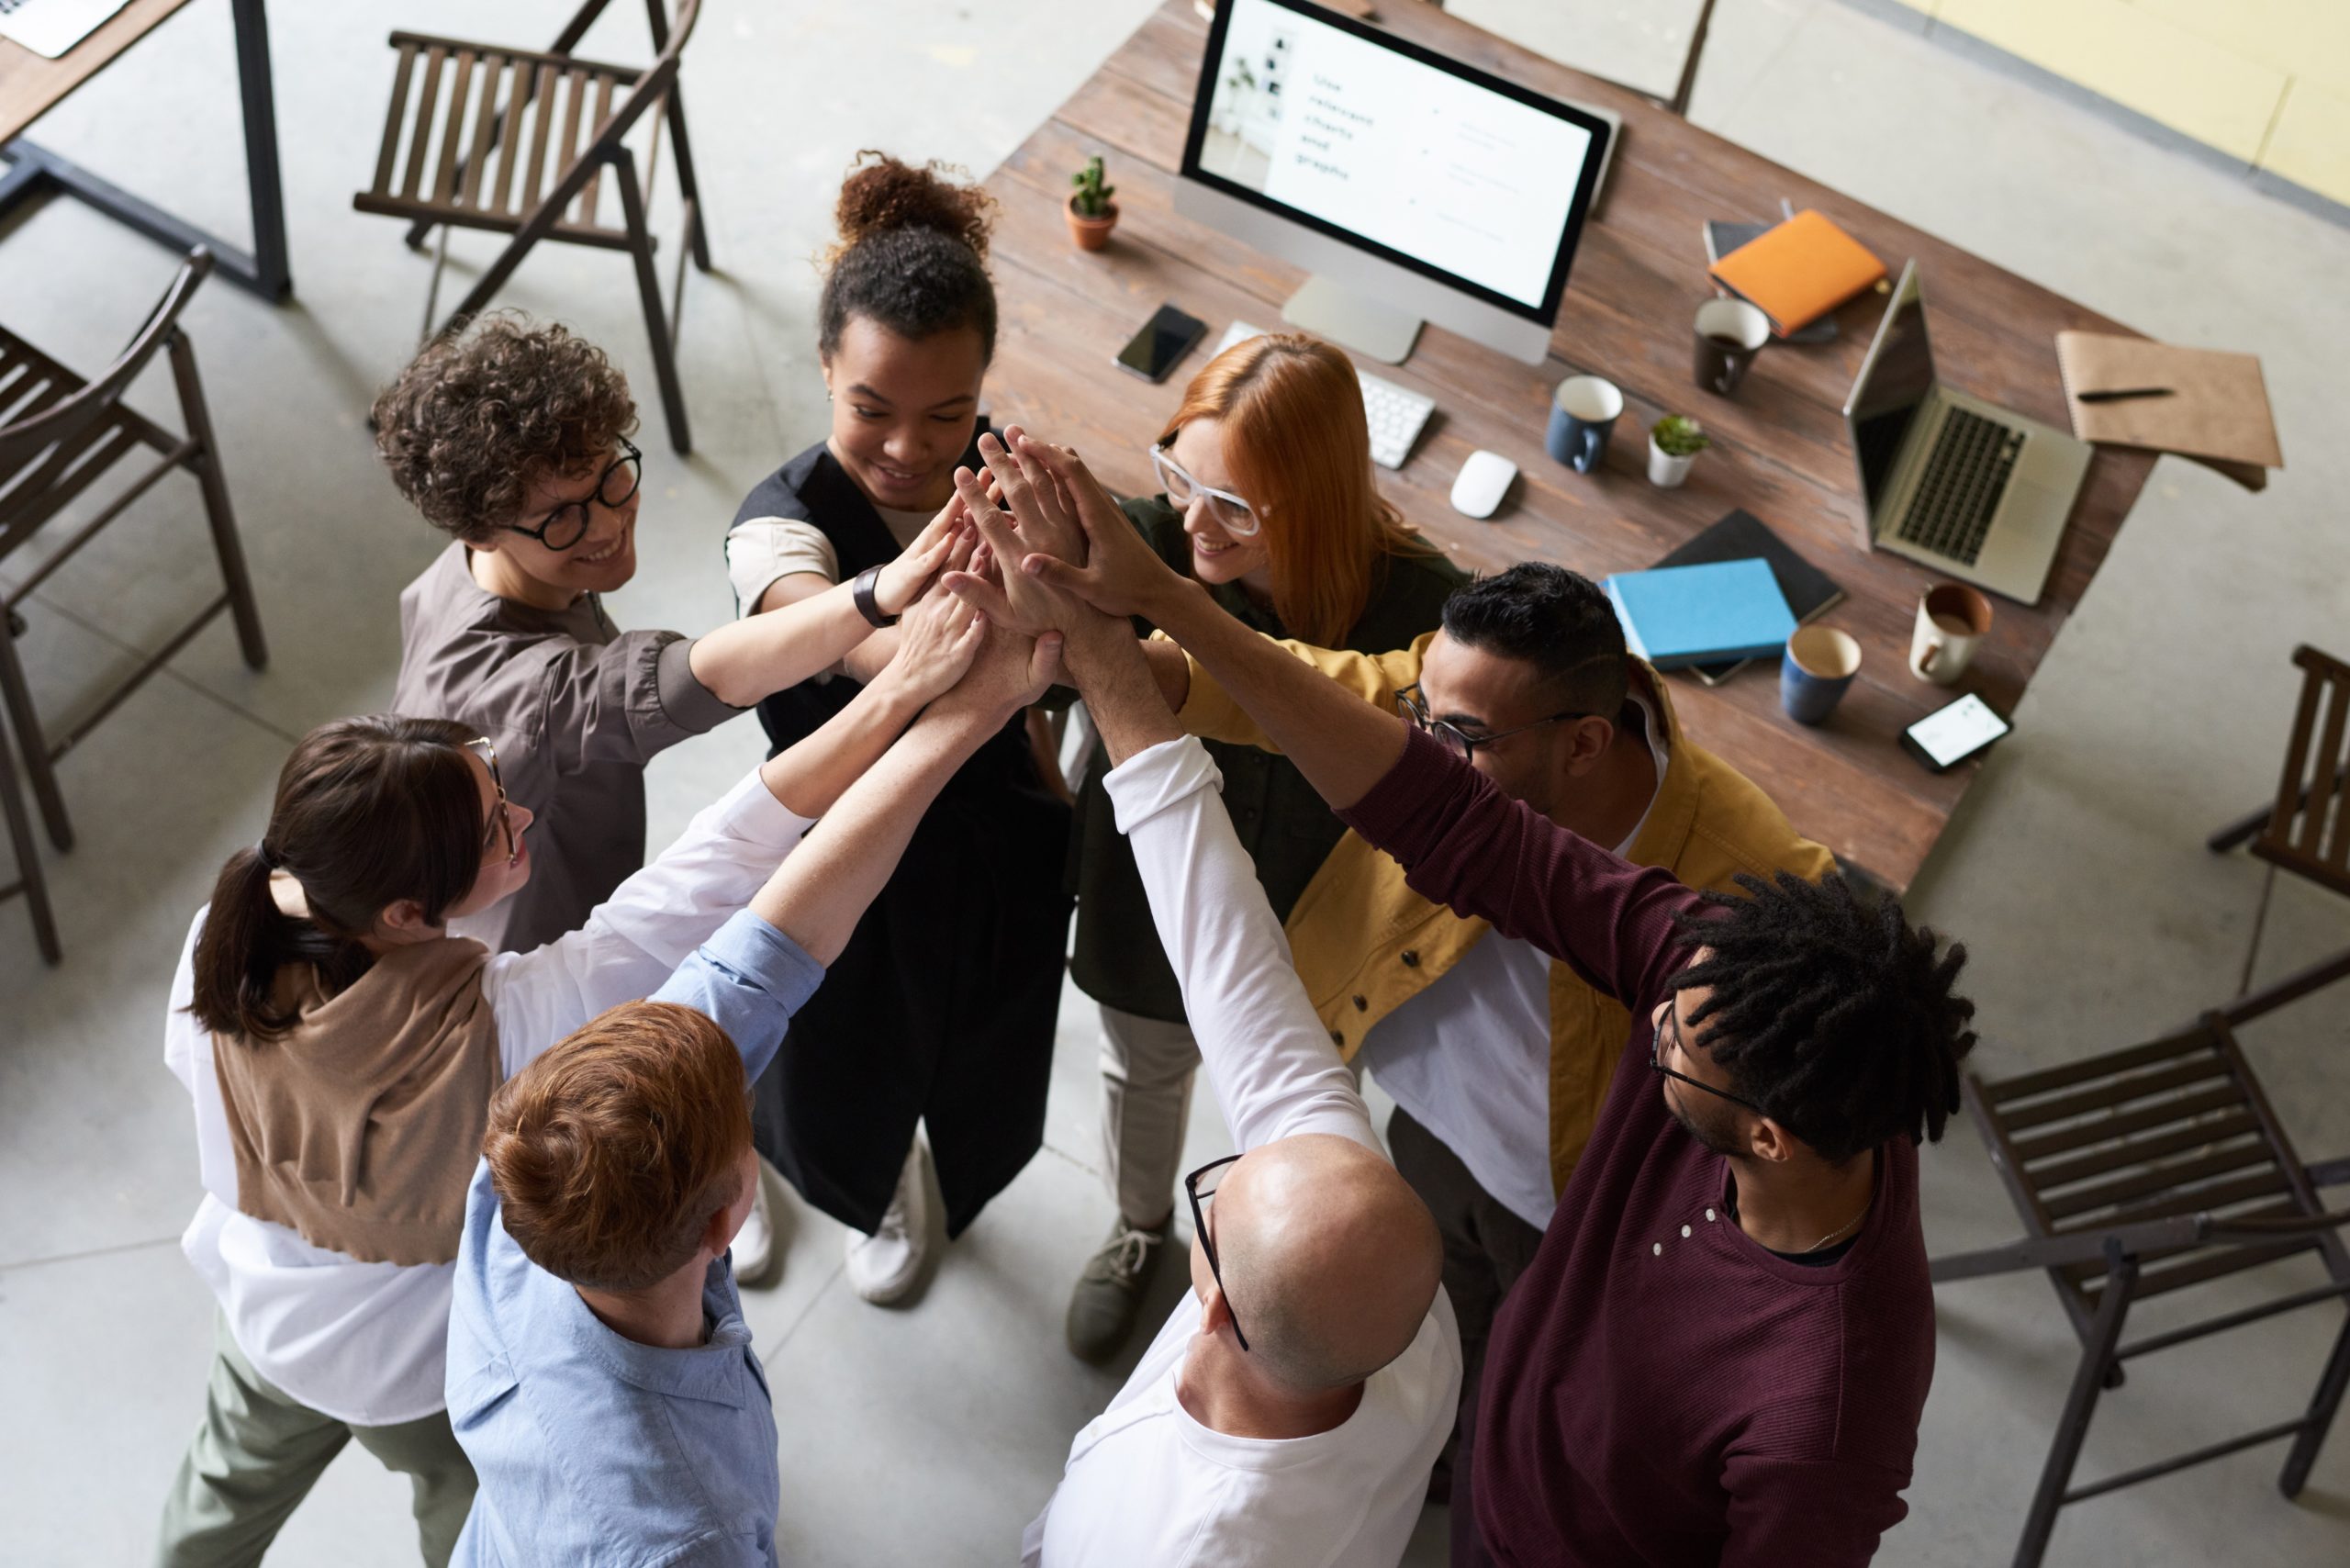 7 Tips For Creating A Positive Workplace Culture